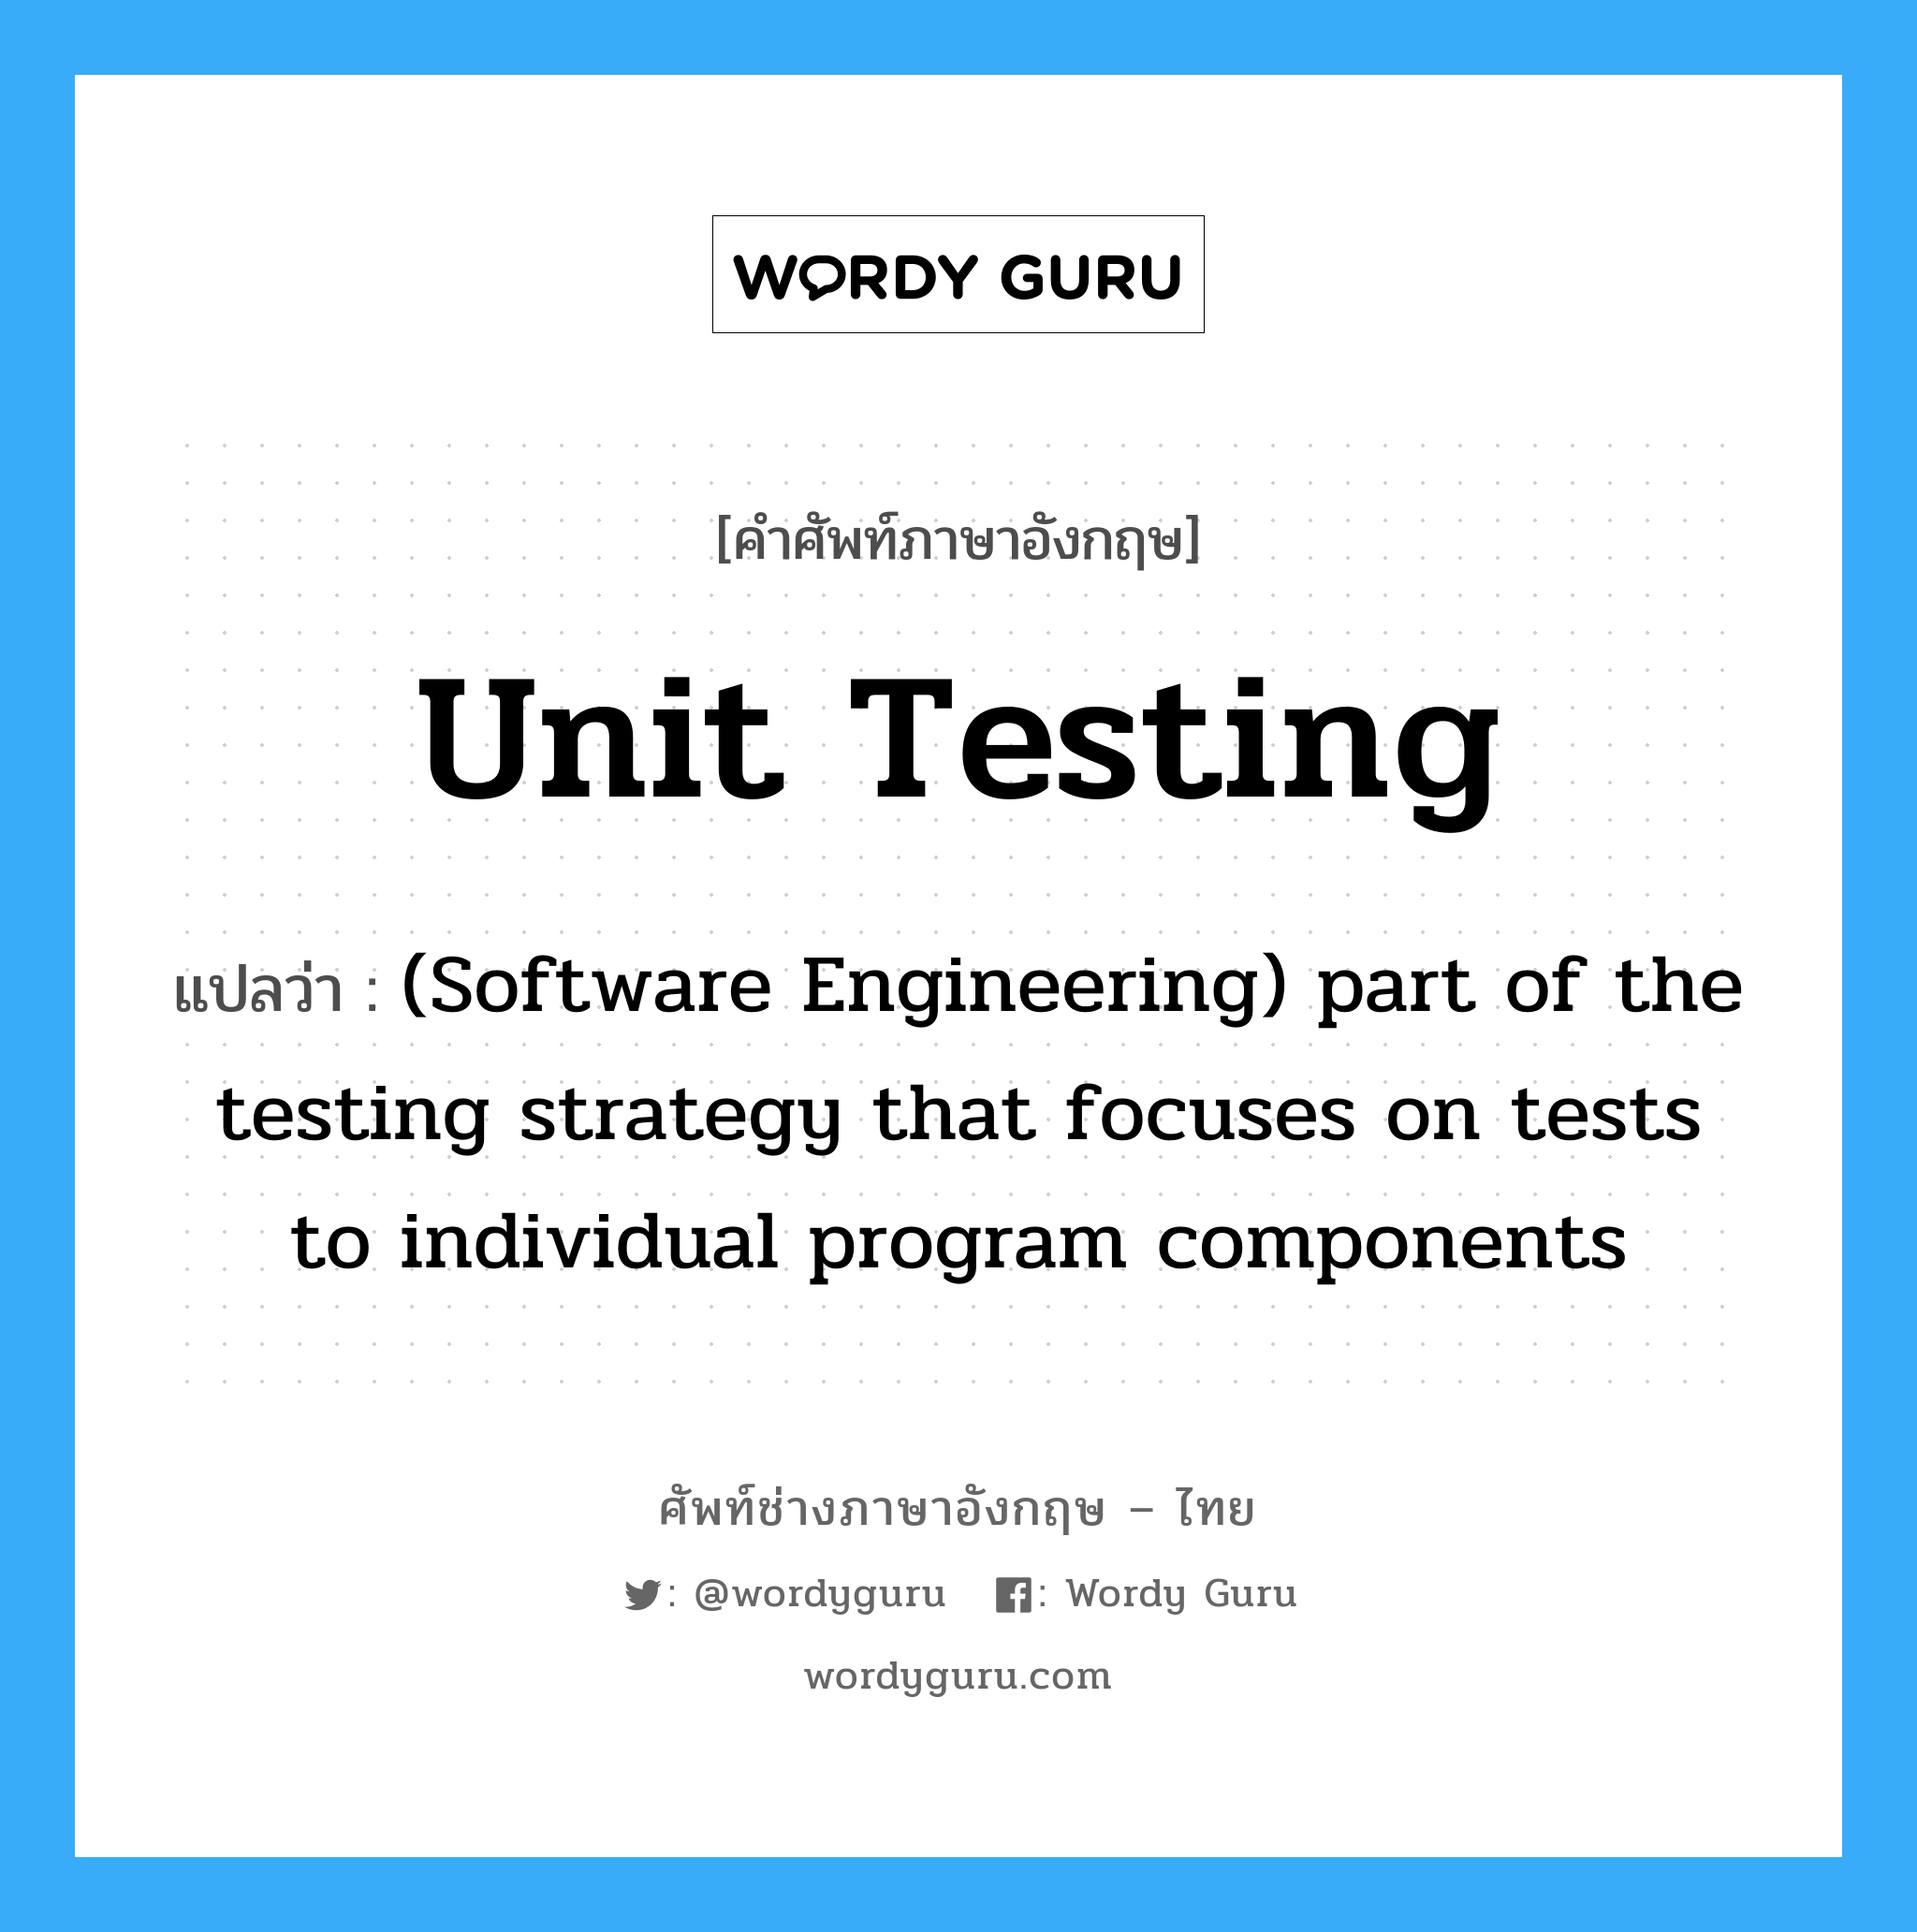 (Software Engineering) part of the testing strategy that focuses on tests to individual program components ภาษาอังกฤษ?, คำศัพท์ช่างภาษาอังกฤษ - ไทย (Software Engineering) part of the testing strategy that focuses on tests to individual program components คำศัพท์ภาษาอังกฤษ (Software Engineering) part of the testing strategy that focuses on tests to individual program components แปลว่า Unit testing